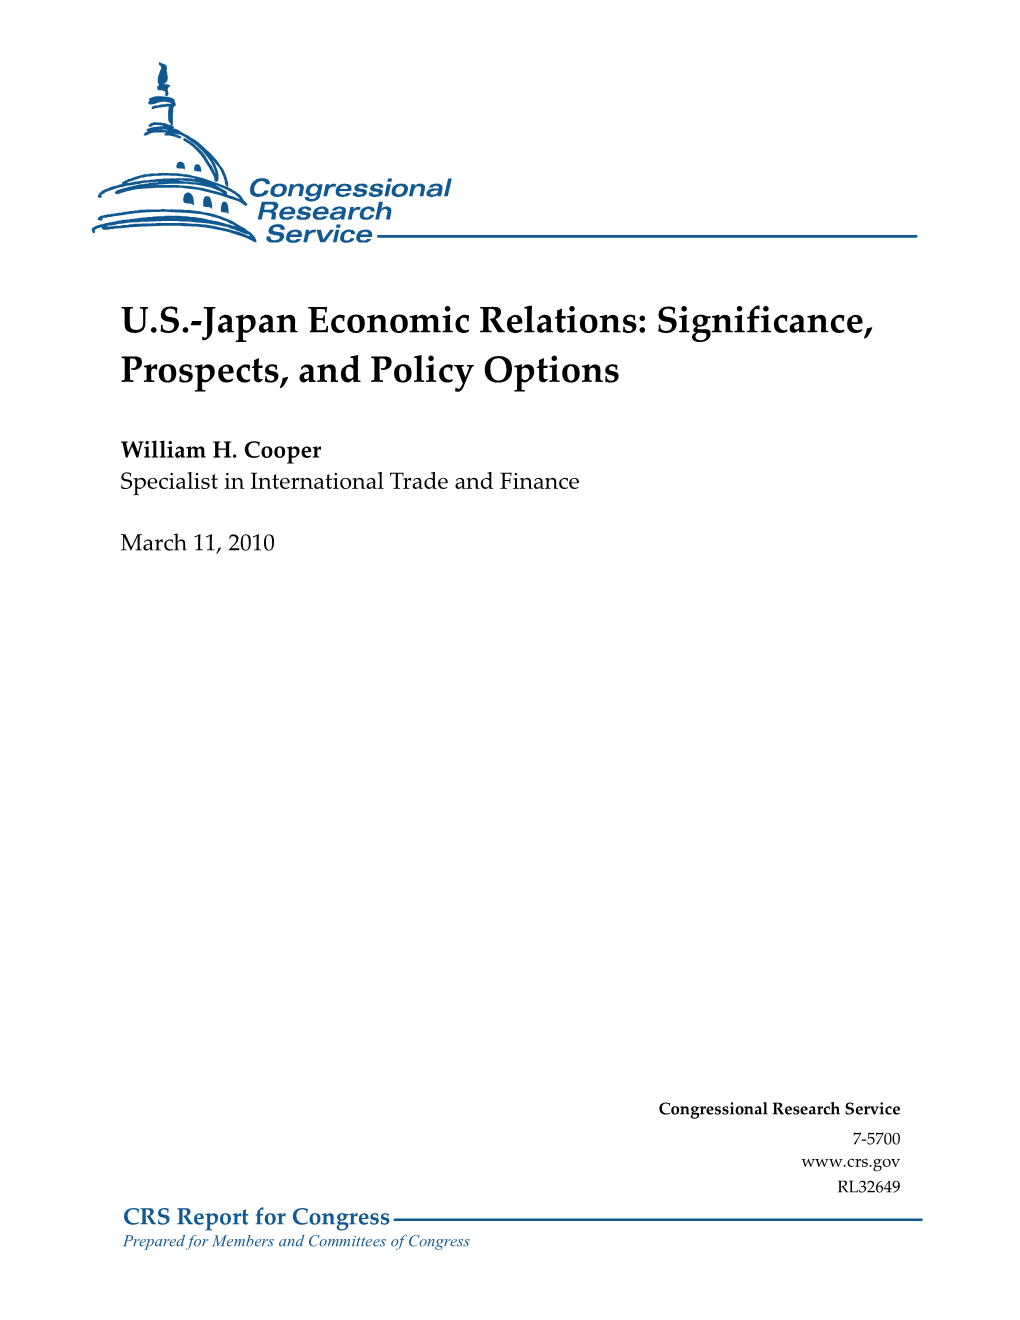 U.S.-Japan Economic Relations: Significance, Prospects, and Policy Options